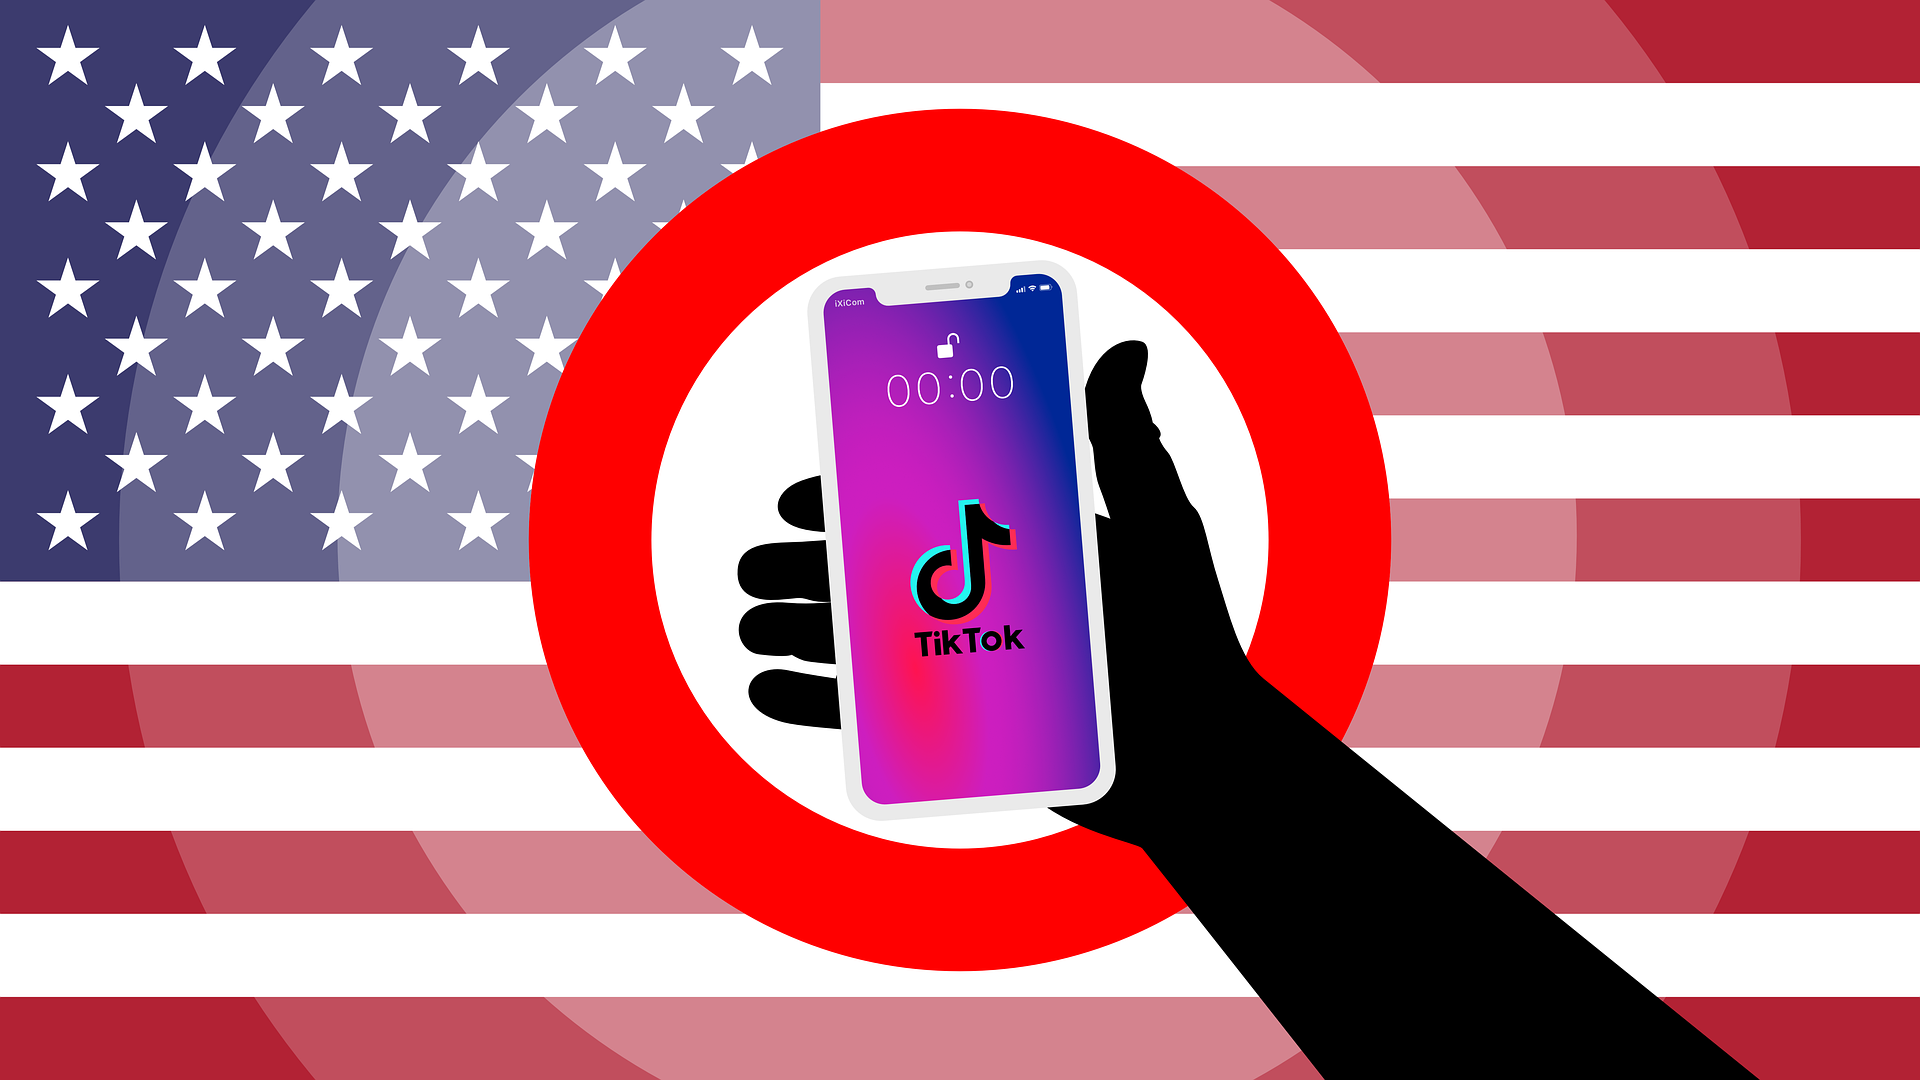 Access Alert: U.S. Publishes Restricted Transactions with TikTok and WeChat